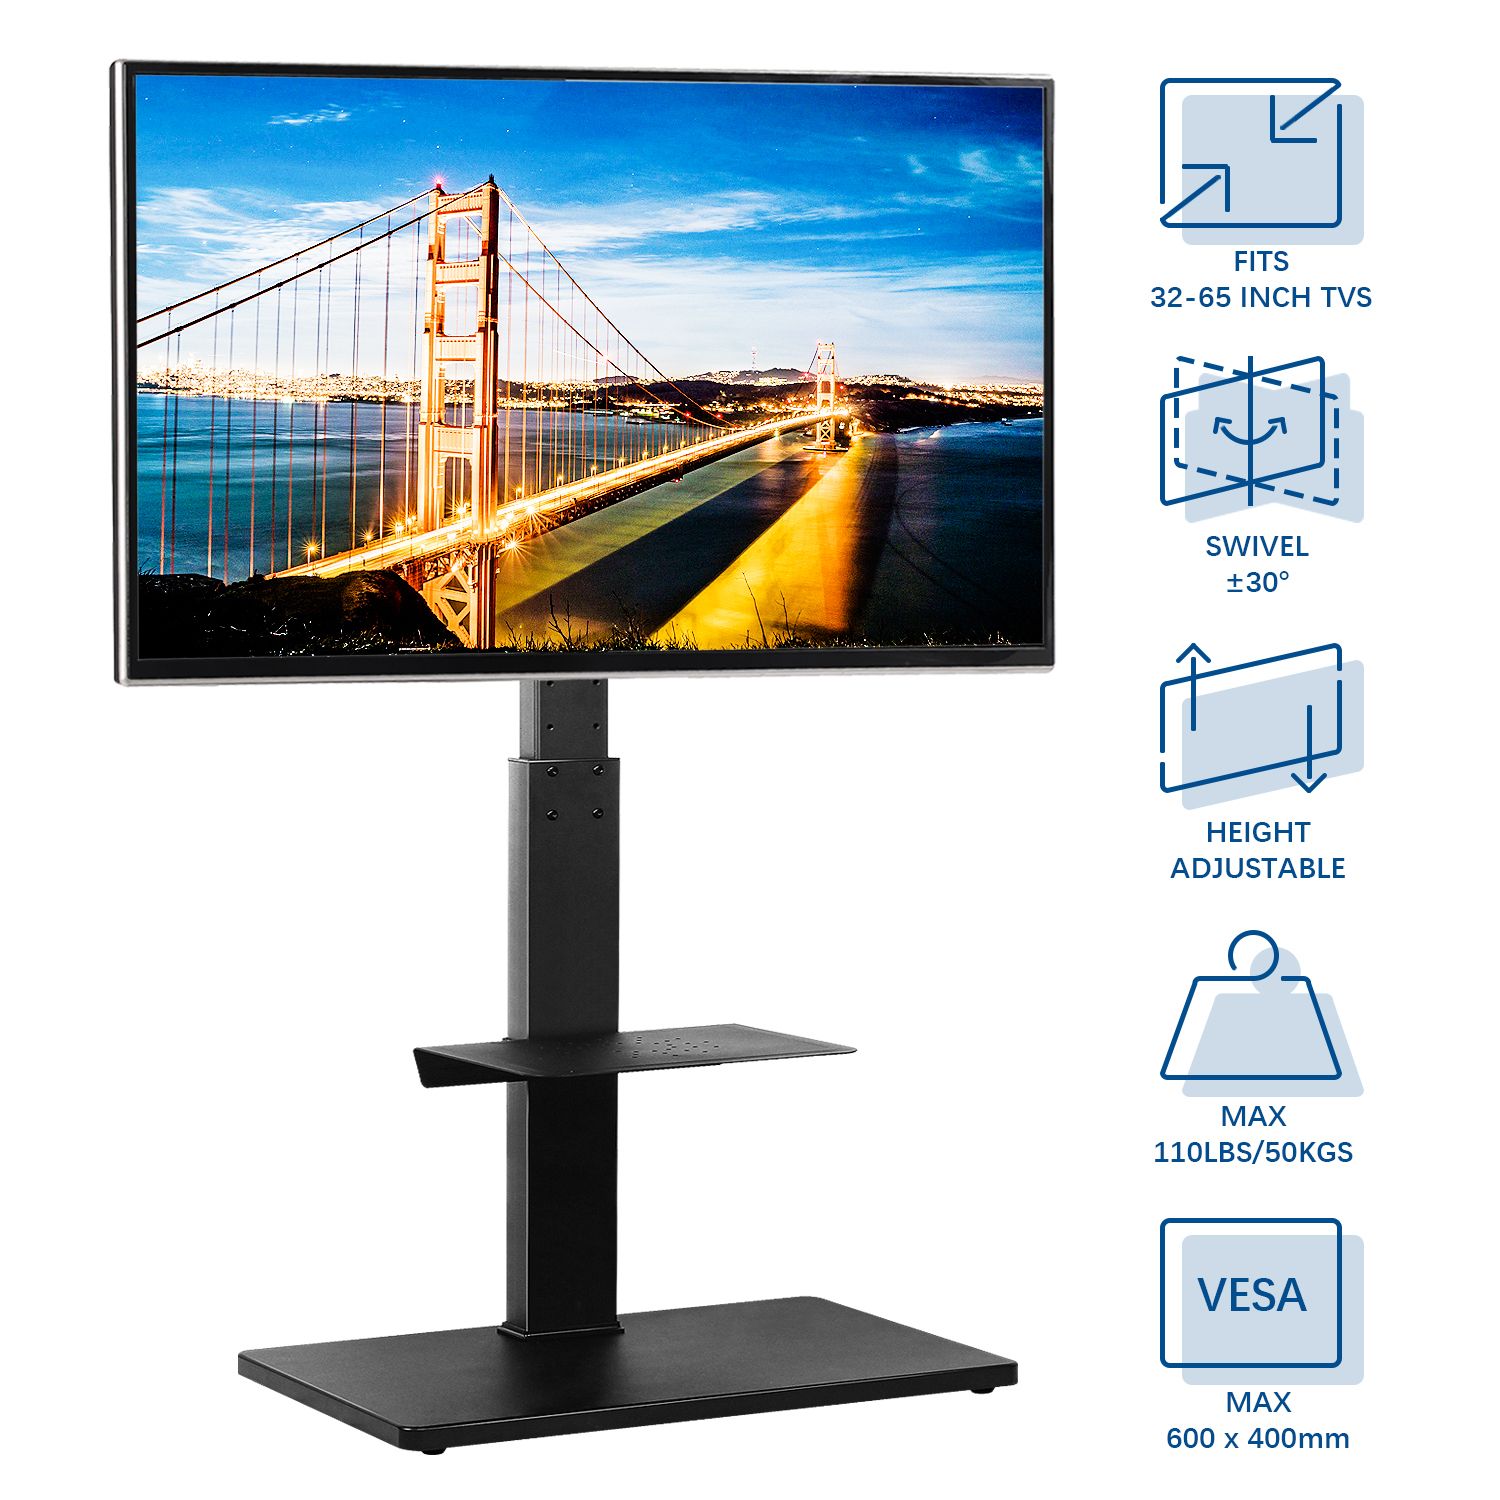 Floor Tv Stand With Swivel Mount And Height Adjustable For Throughout Rfiver Universal Floor Tv Stands Base Swivel Mount With Height Adjustable Cable Management (View 4 of 15)